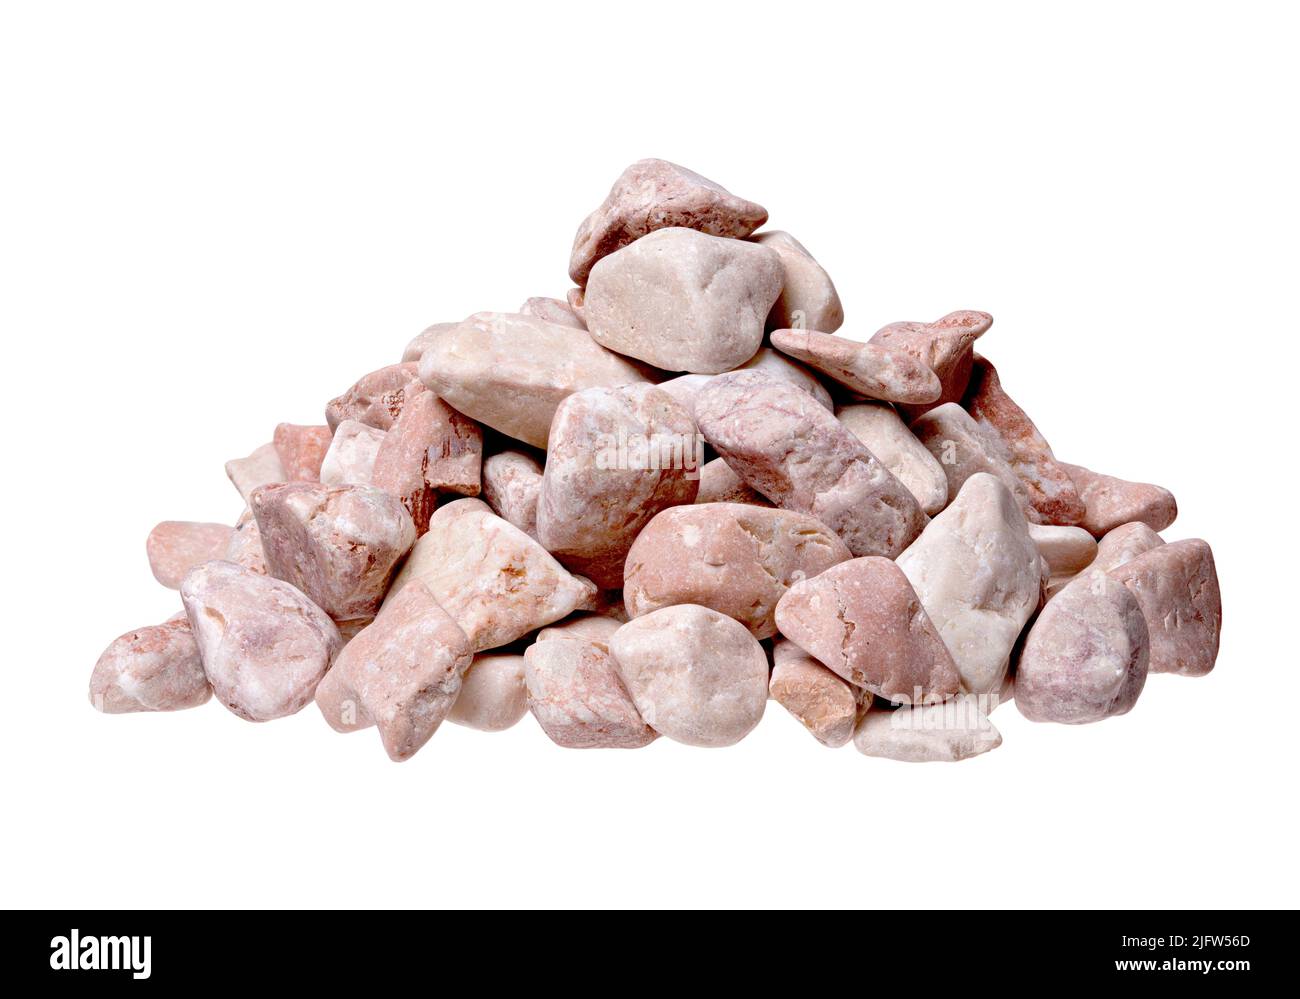 Pink pebble stone over white background close-up. Stock Photo